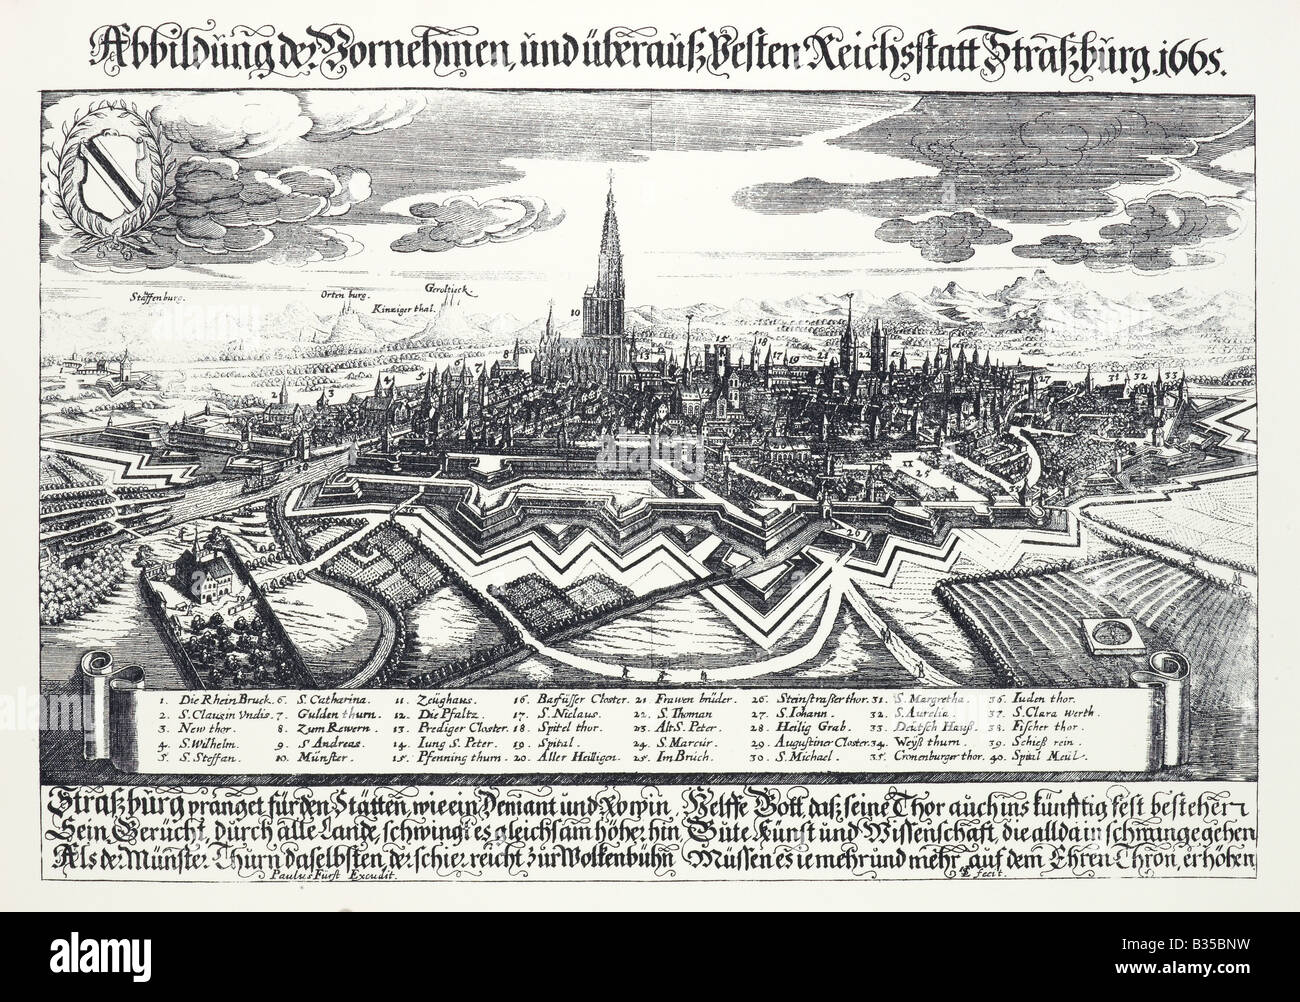 VINTAGE WOODCUT PRINT ILLUSTRATION 17th Century SHOWING THE MEDEVIAL FORTIFIED TOWN OF STRASBOURG ALSACE FRANCE EUROPE Stock Photo